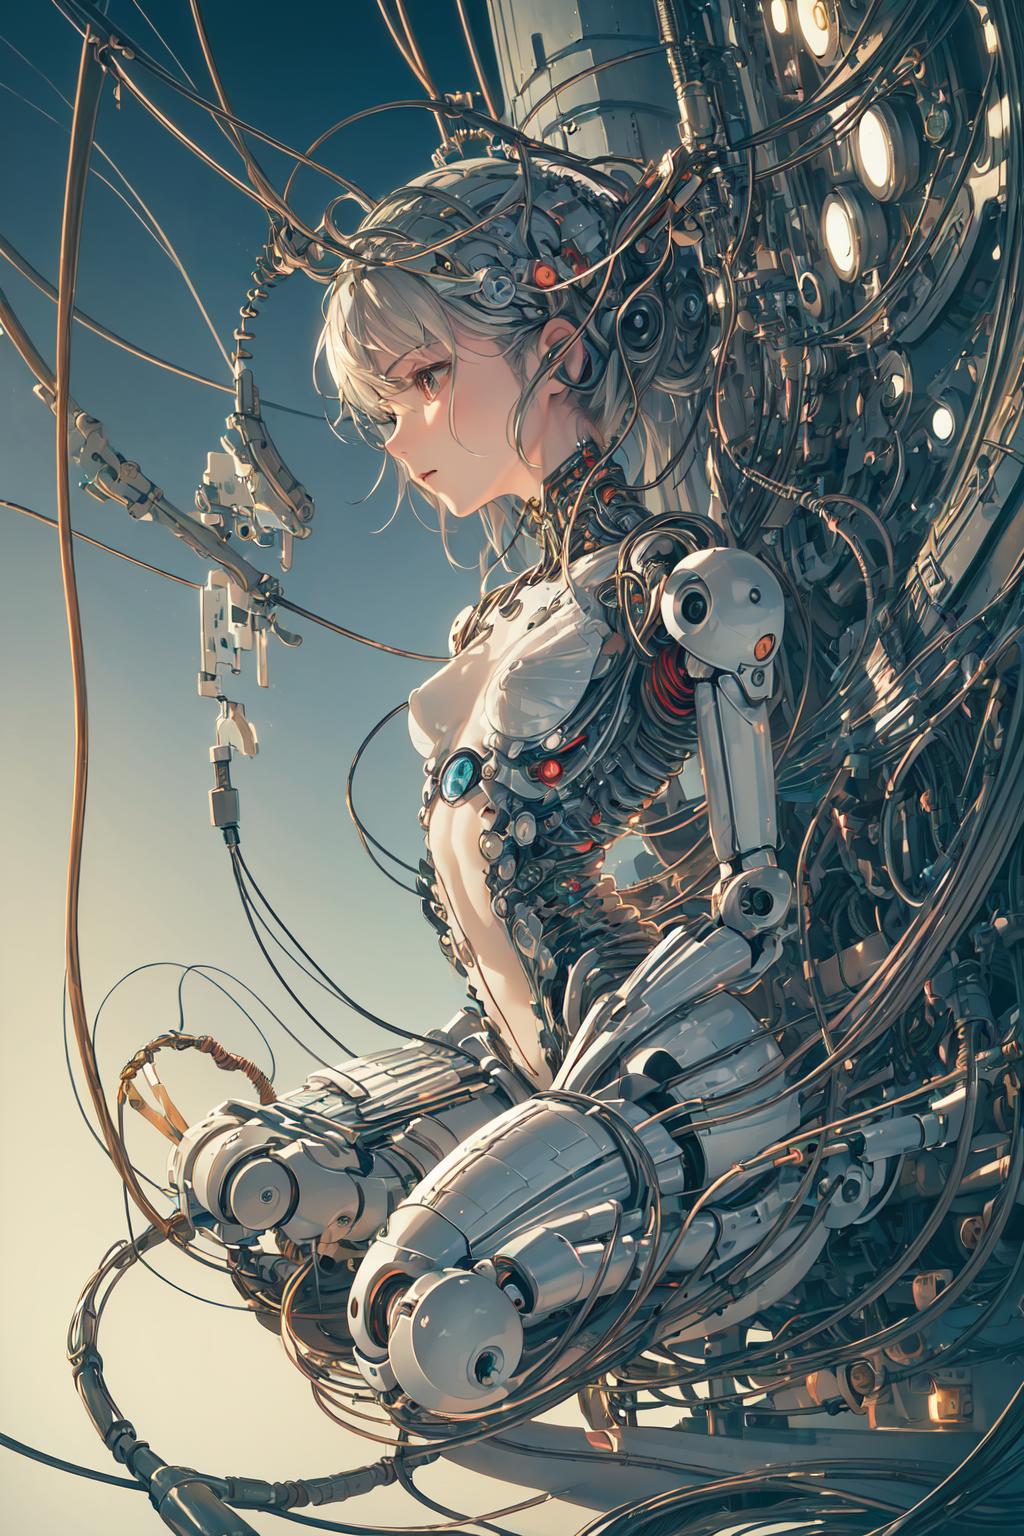 A robot with a female appearance, surrounded by wires and mechanical parts.